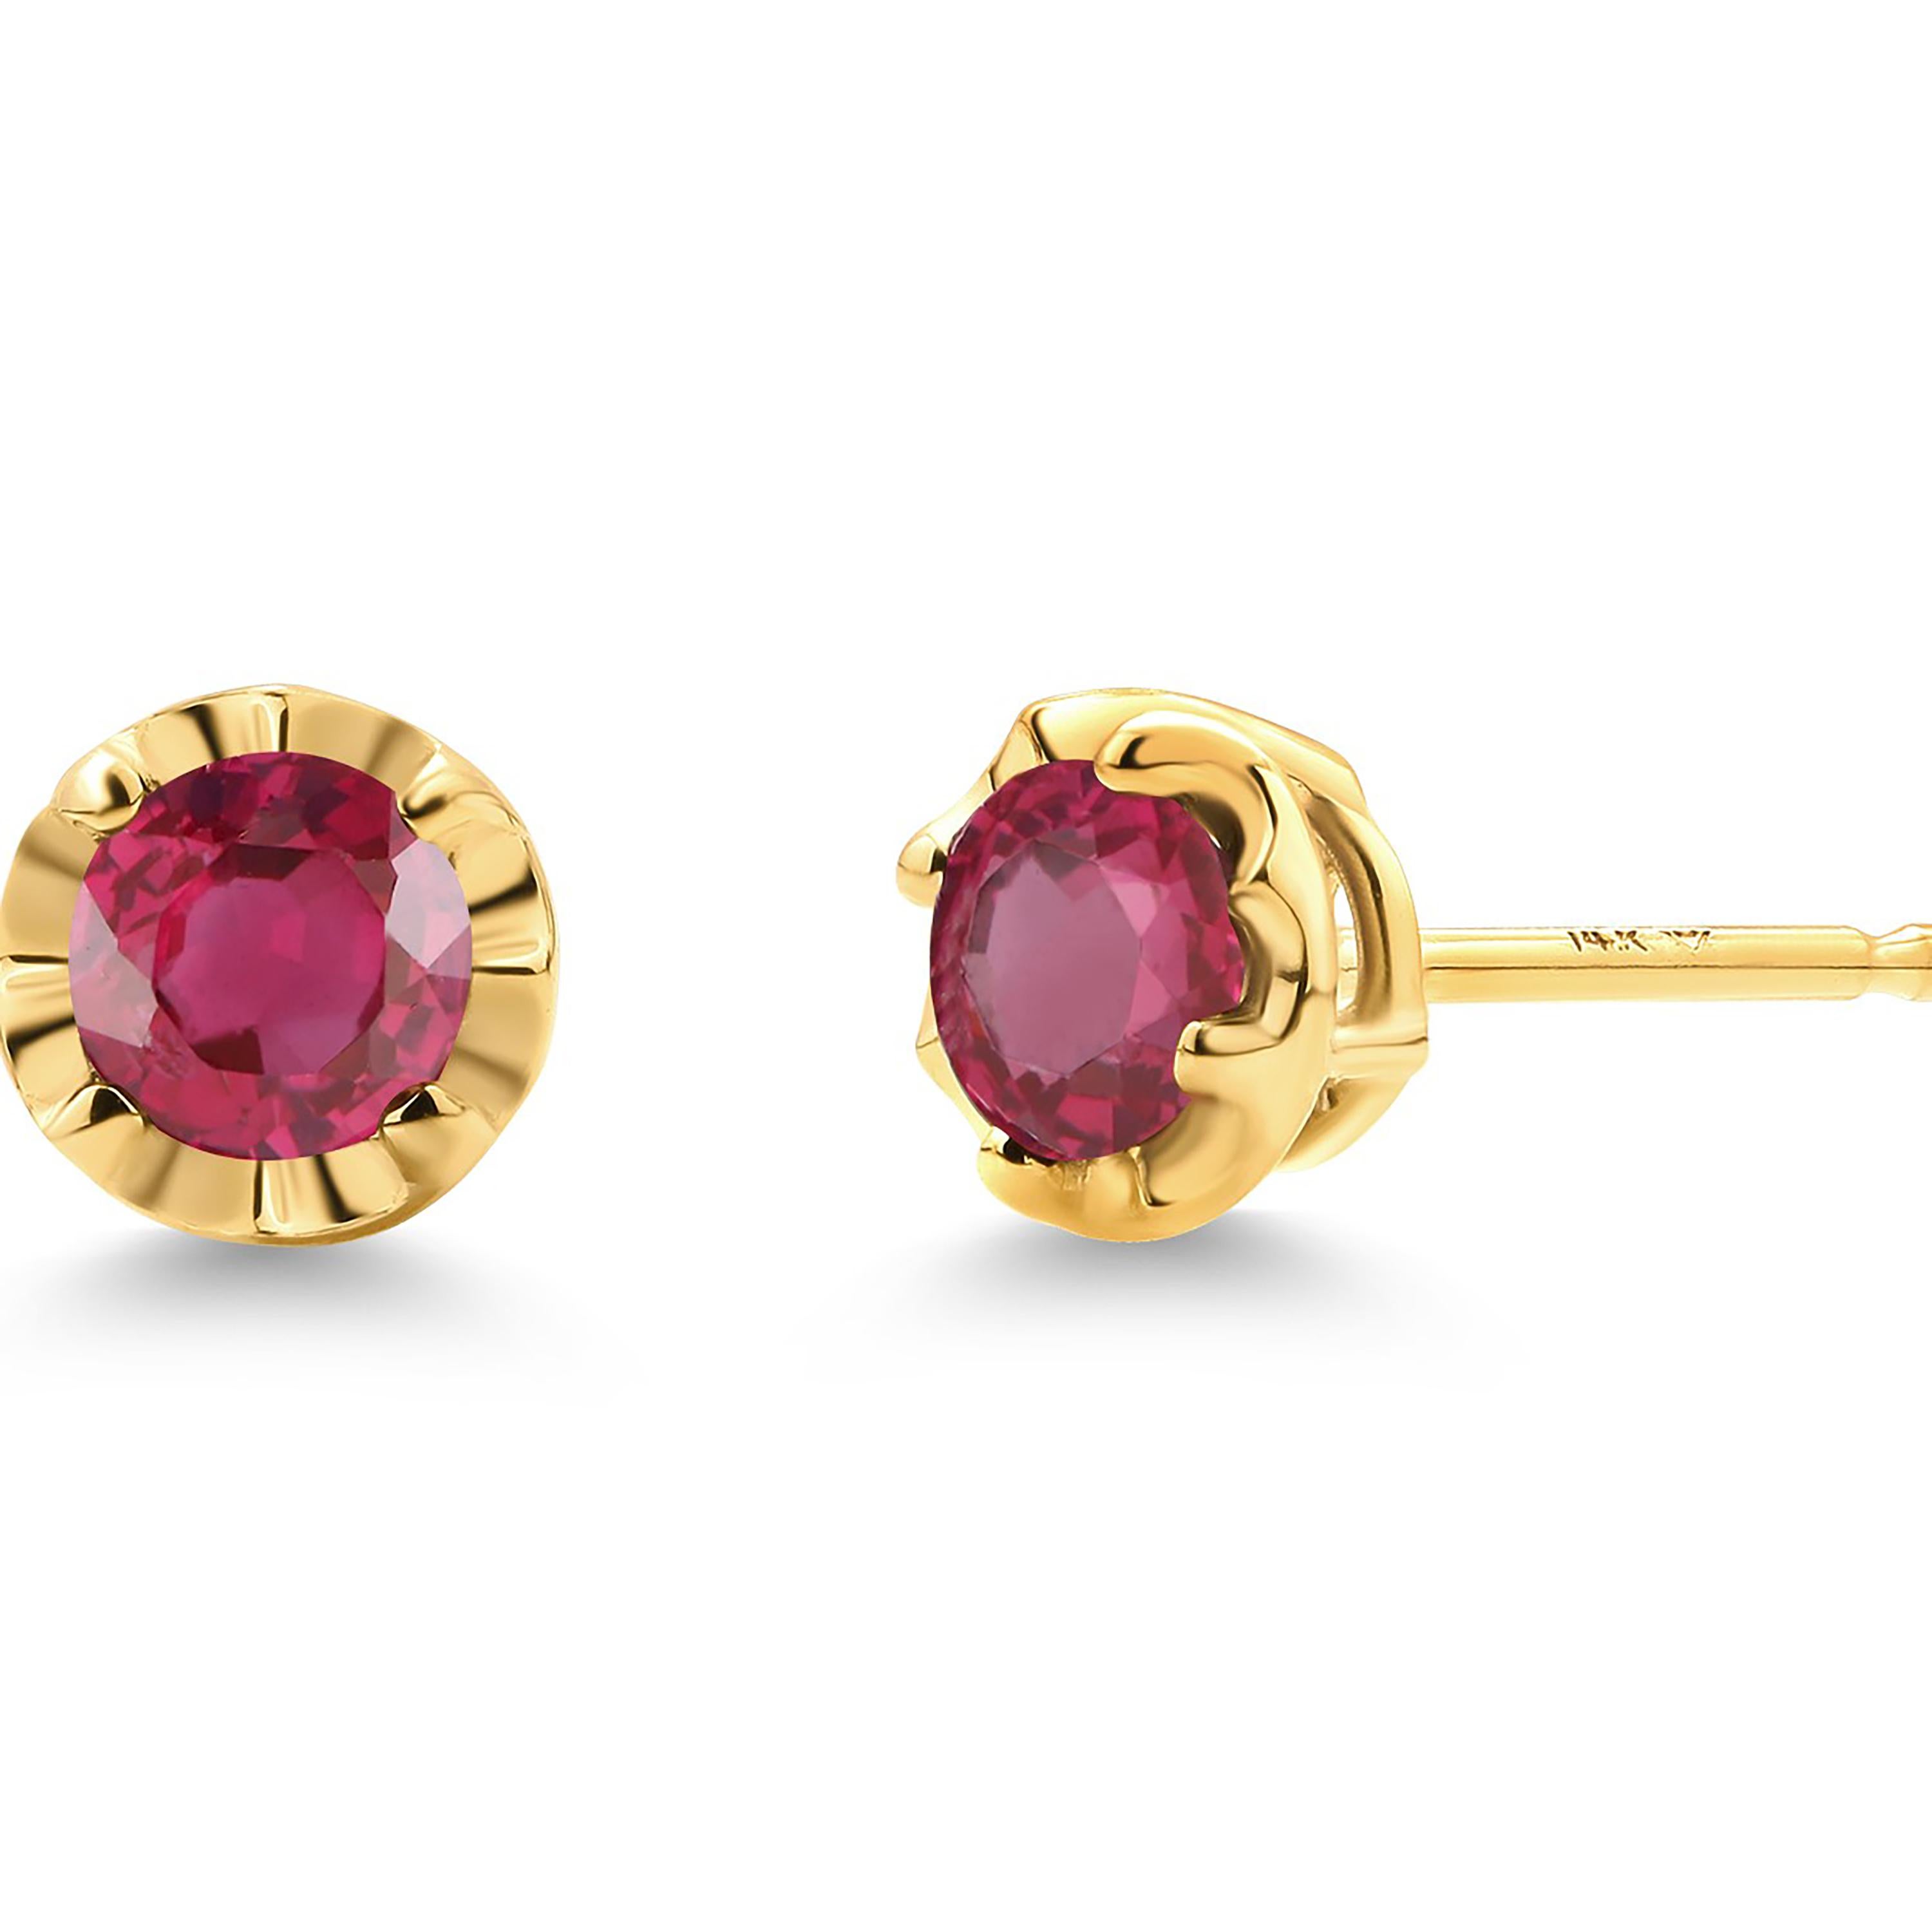 Matched Burma Rubies Weighing 0.60 Carat 0.23 Inch Scalloped Gold Stud Earrings In New Condition For Sale In New York, NY